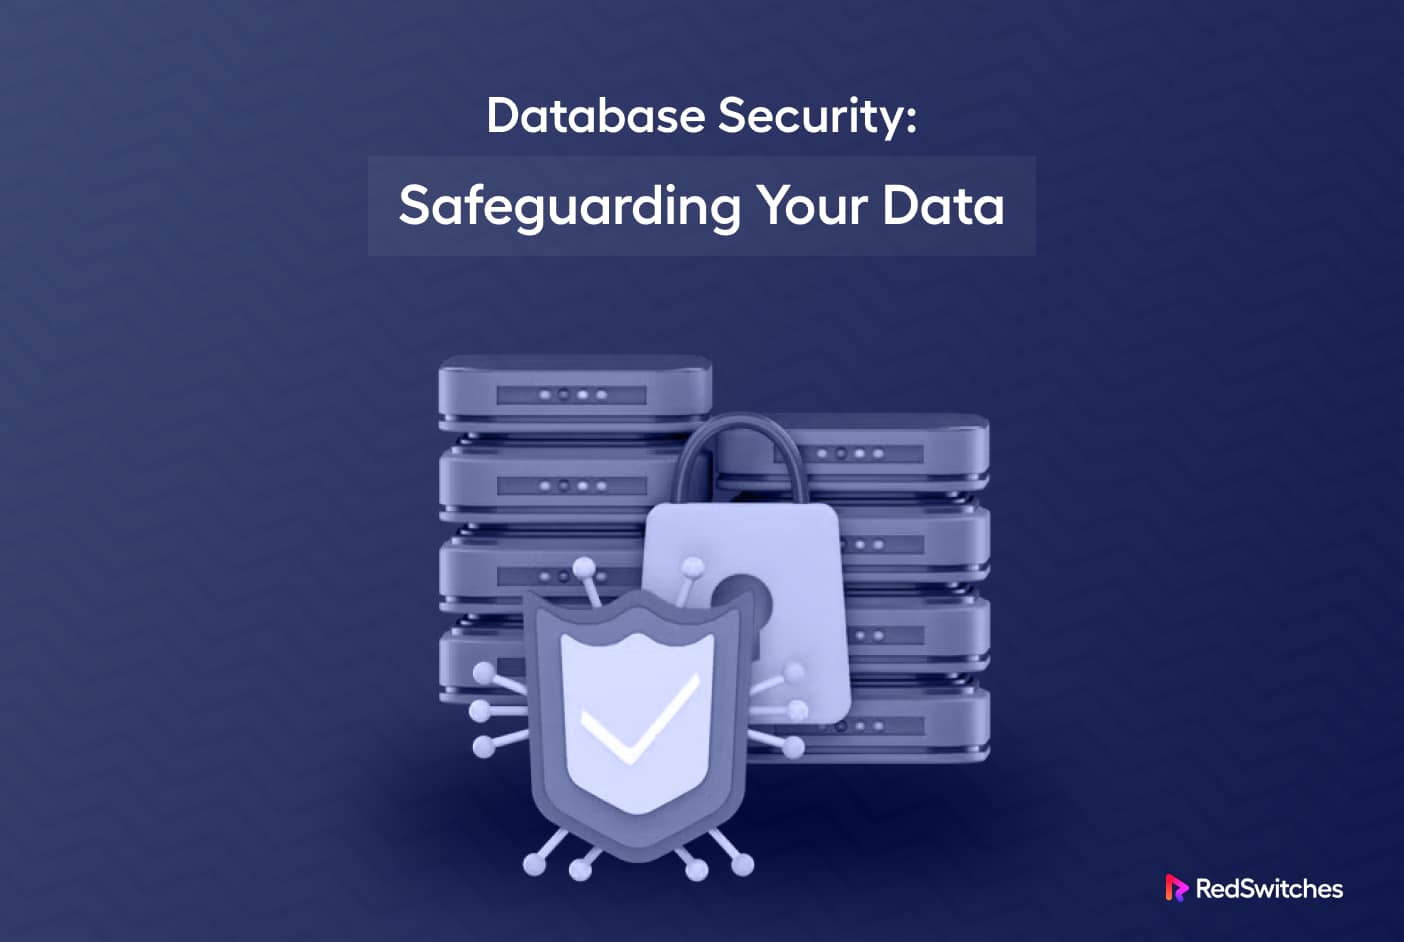 database security in dbms